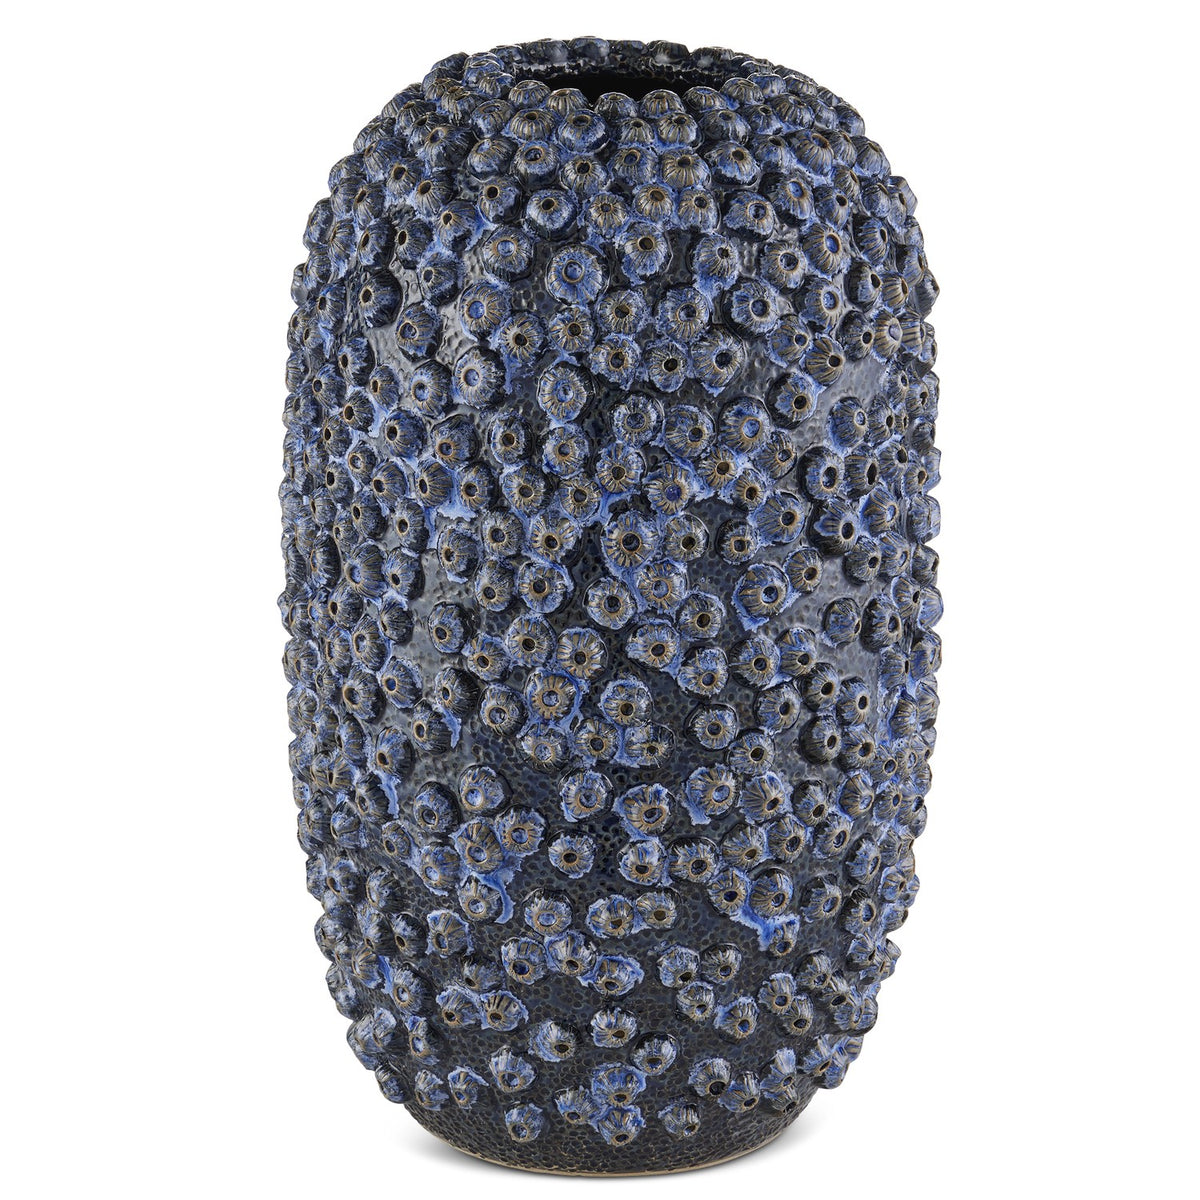 Currey and Company Vase from the Deep Sea collection in Reactive Blue finish